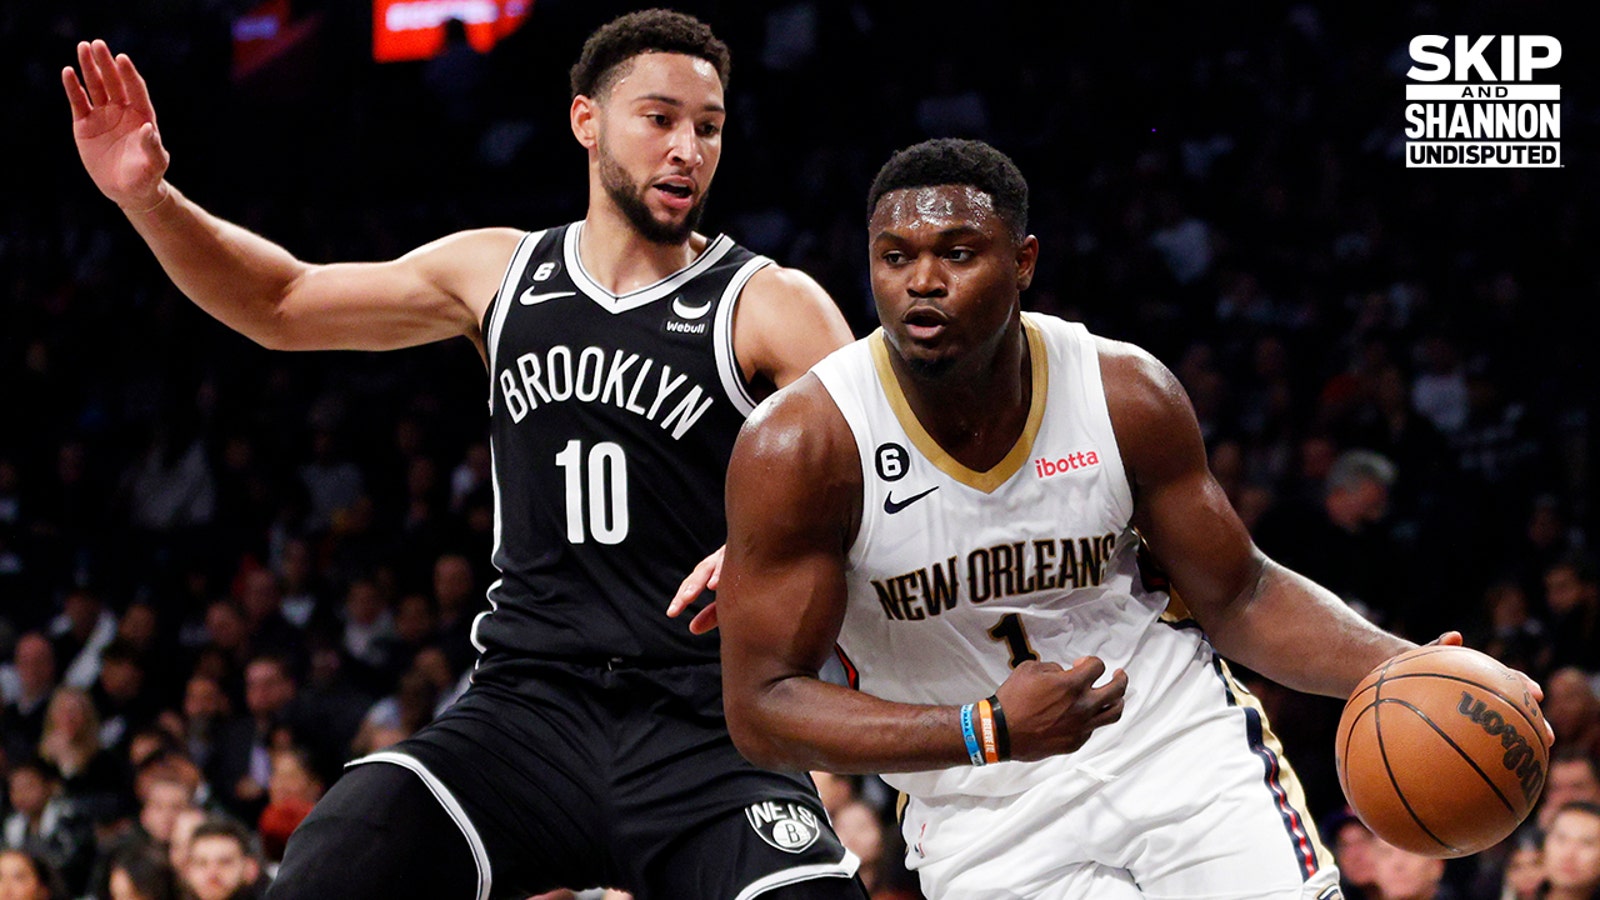 Zion Williamson, Pelicans dominate KD, Kyrie, Ben Simmons & Nets in blowout win